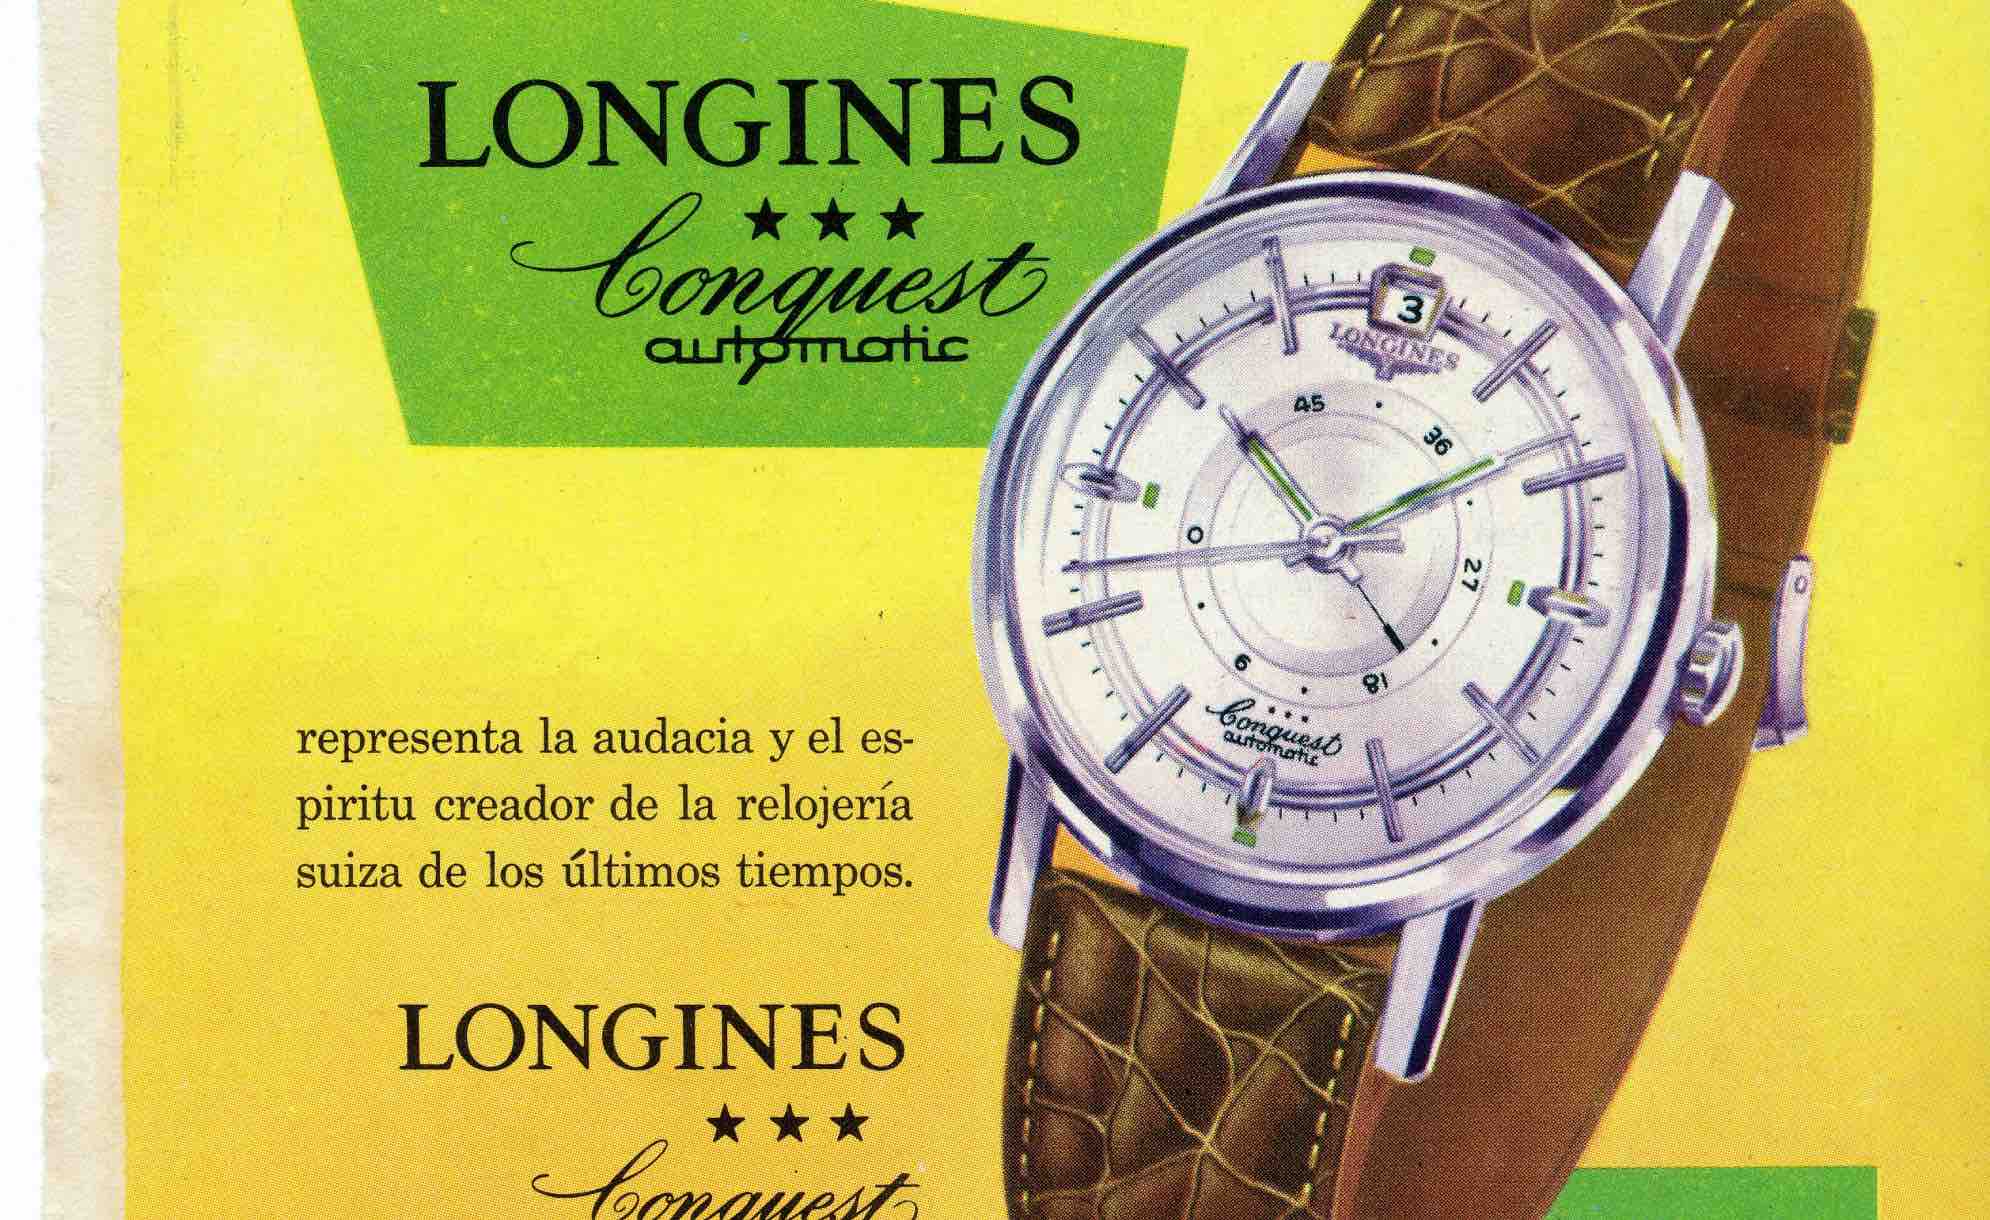 vintage brochure of the Longines Conquest Heritage Central Power Reserve